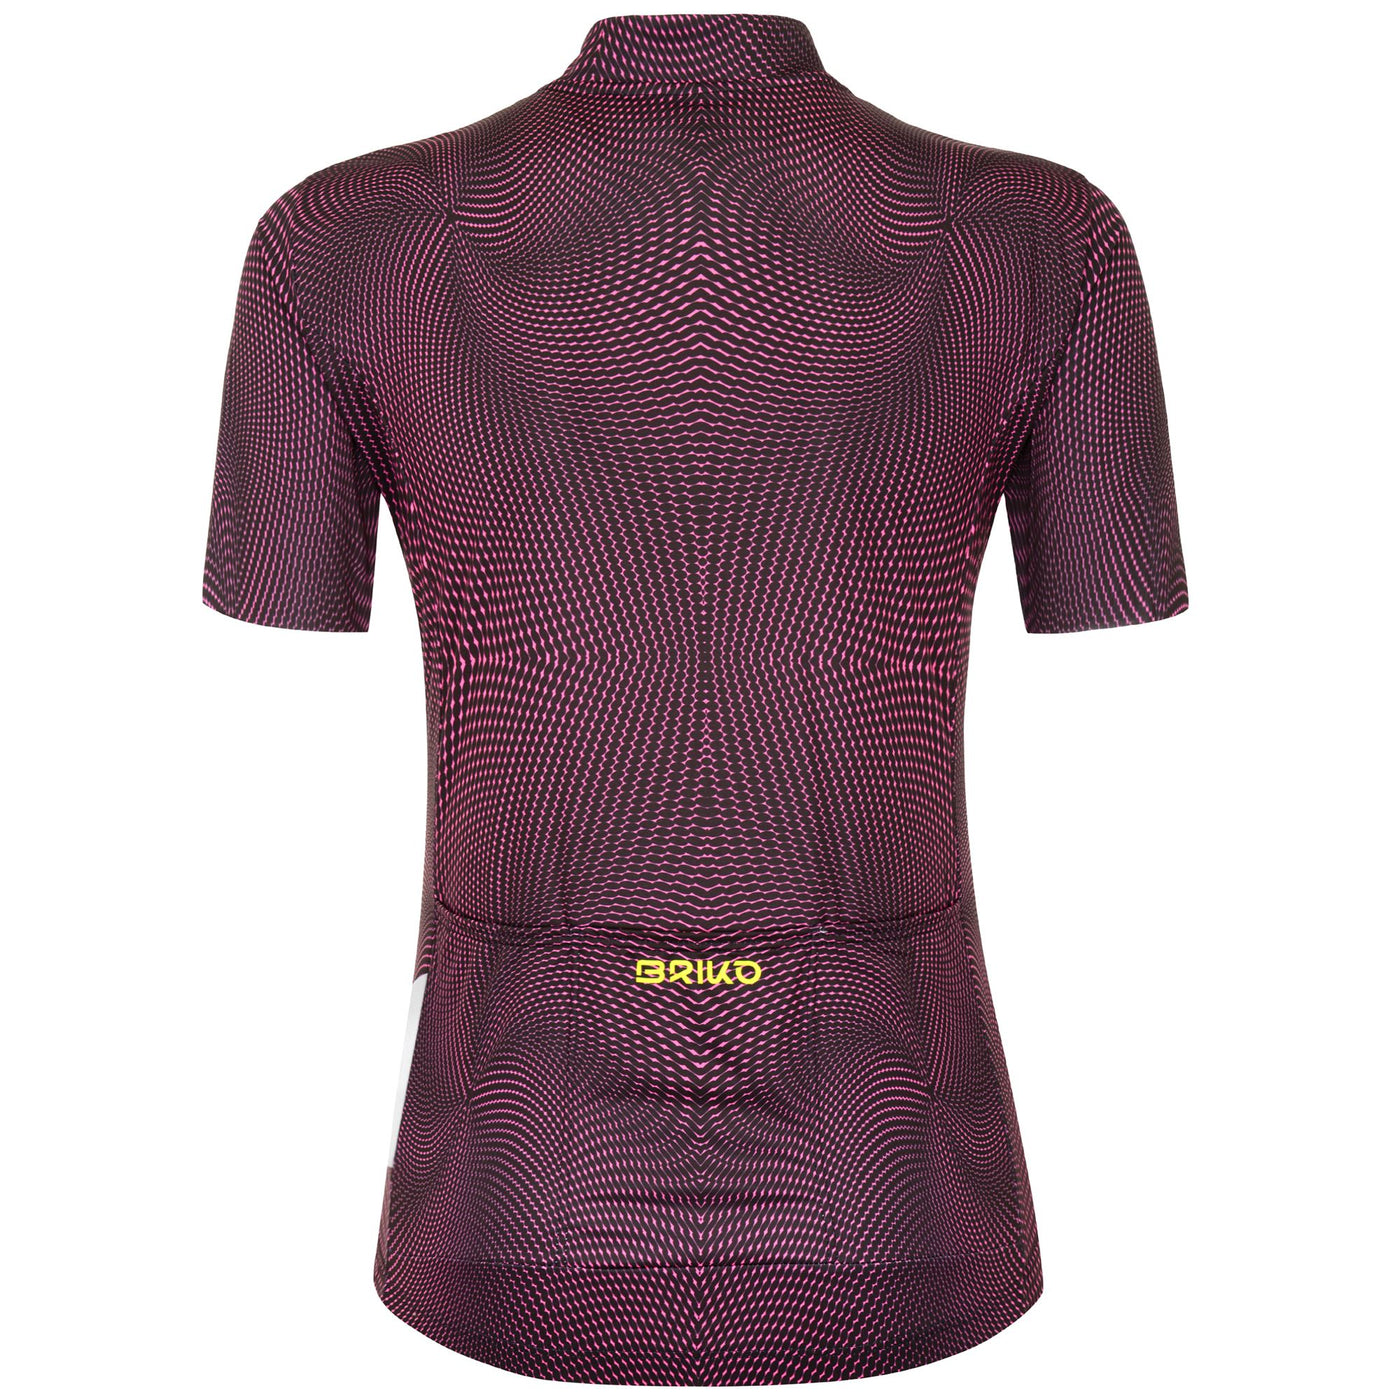 Active Jerseys Woman CLASSIC LADY JERSEY 2.0 Shirt BLACK ALICIOUS- PINK FLUO | briko Dressed Front (jpg Rgb)	